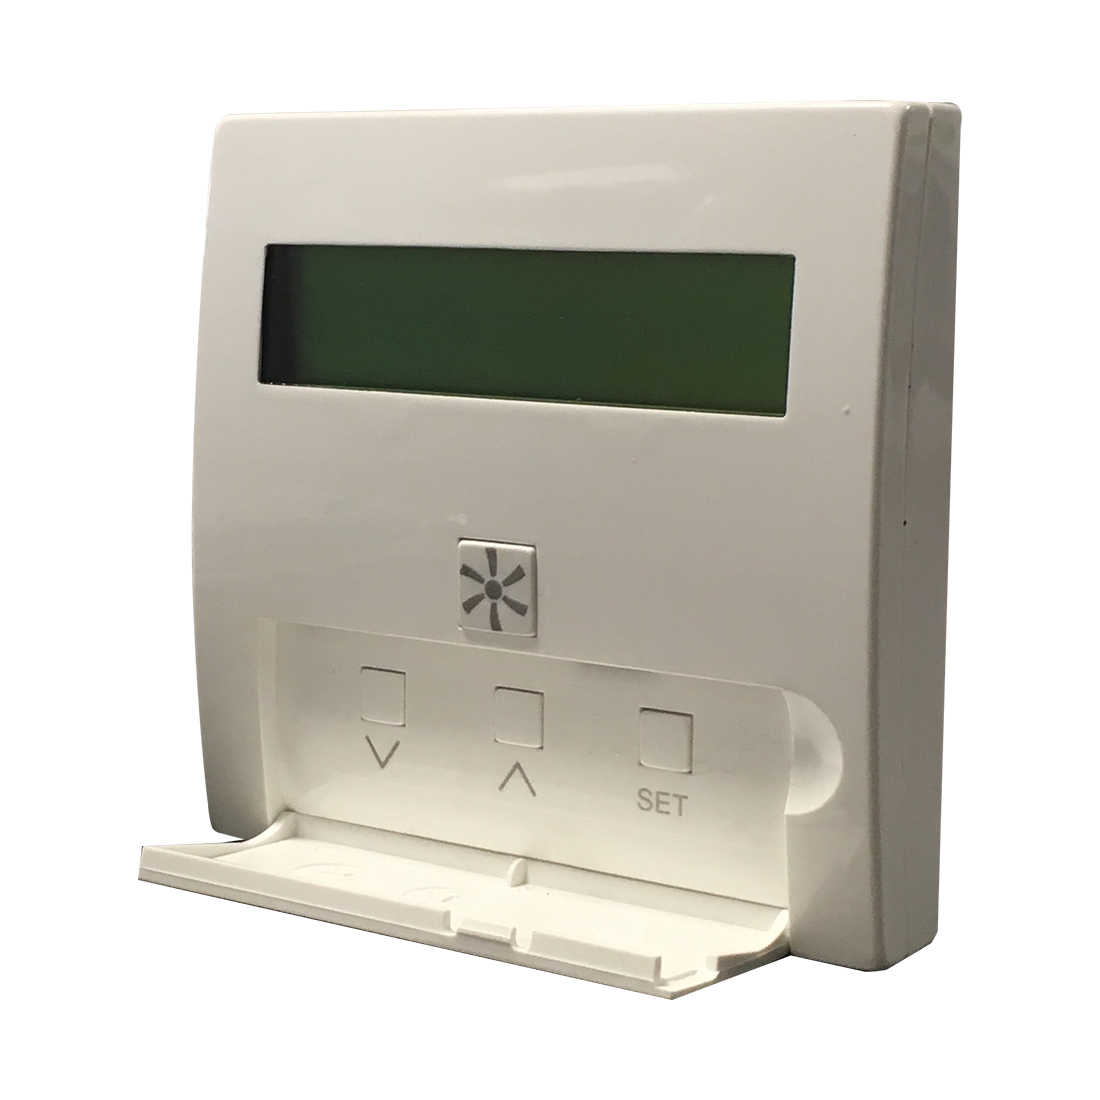 vent-axia-sentinel-kinetic-wired-controller-bpcventilation